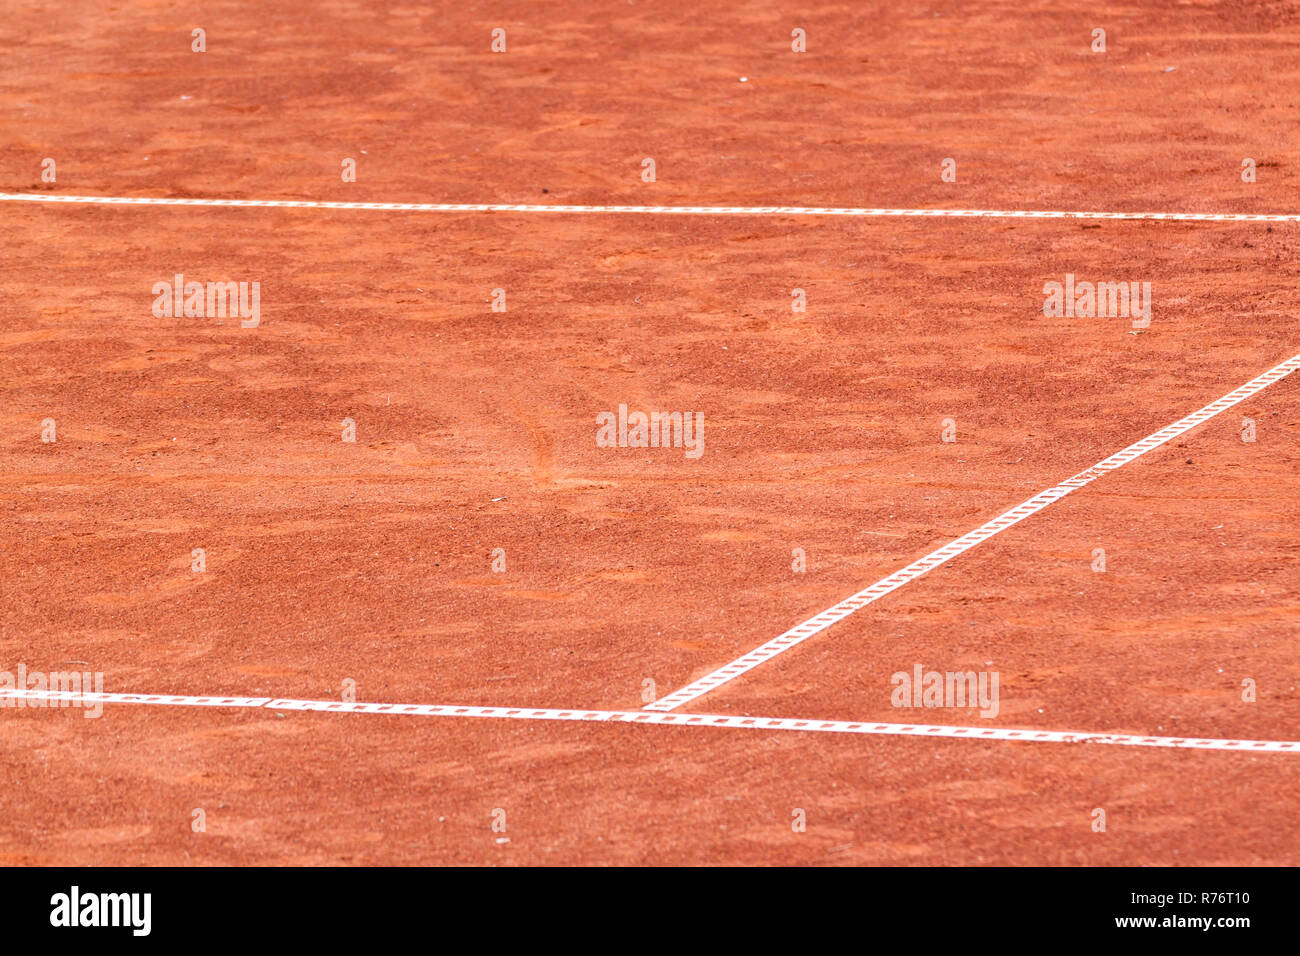 Clay tennis court with white plastic lines Stock Photo - Alamy